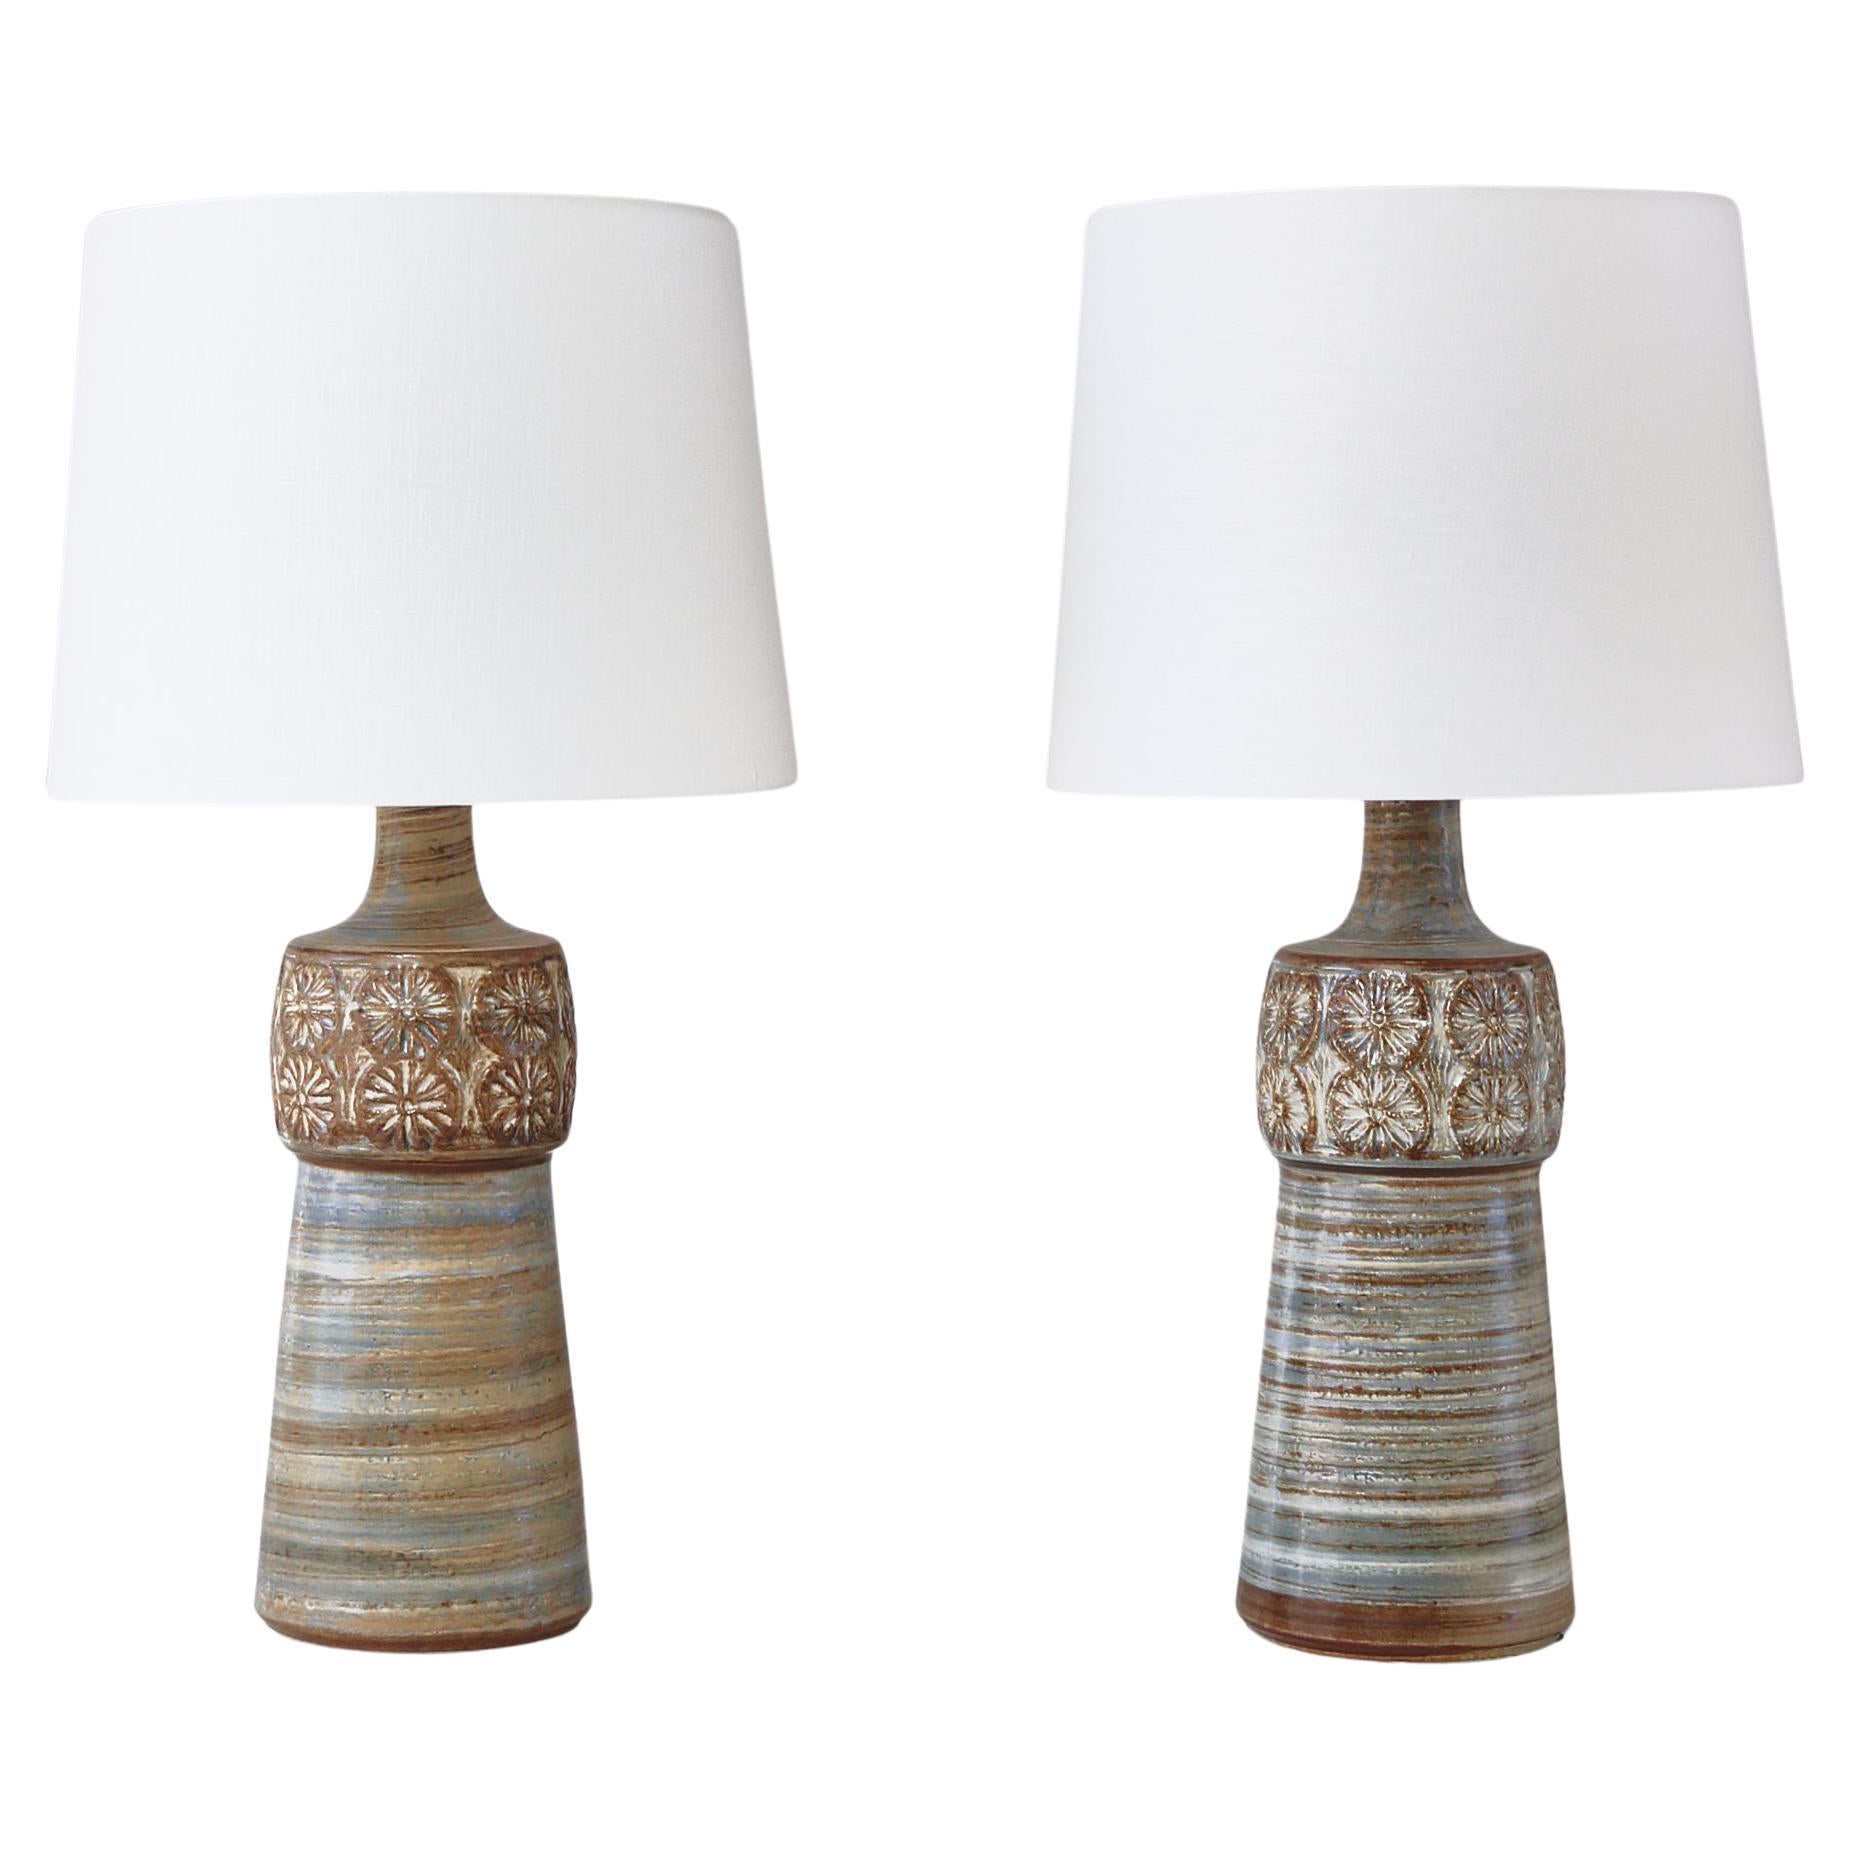 Pair of Unique Danish Modern Stoneware Table Lamps by Søholm, Denmark, 1960s